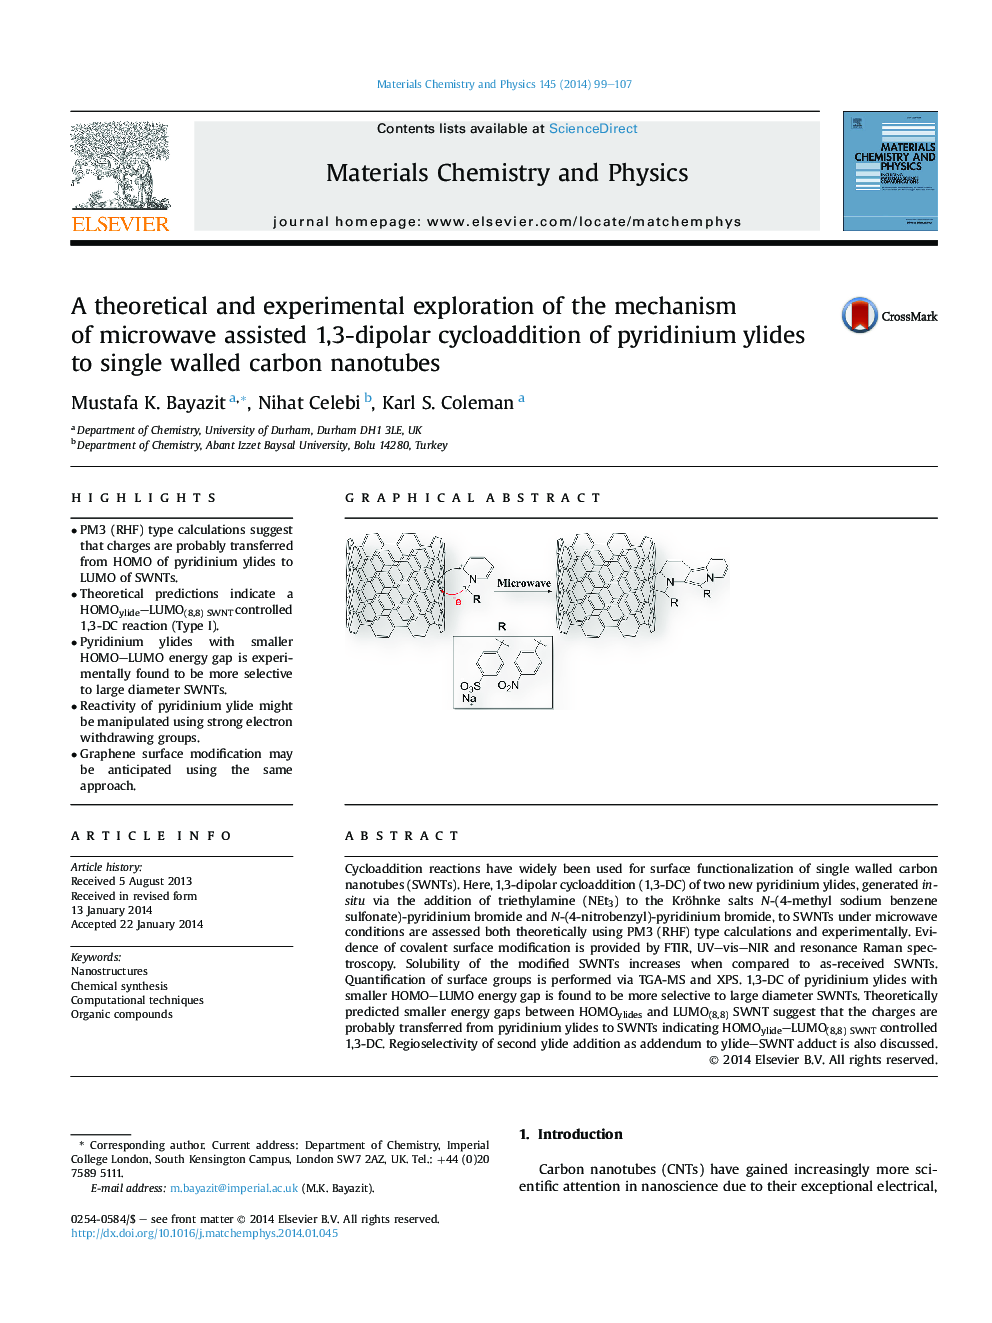 A theoretical and experimental exploration of the mechanism ofÂ microwave assisted 1,3-dipolar cycloaddition of pyridinium ylides to single walled carbon nanotubes